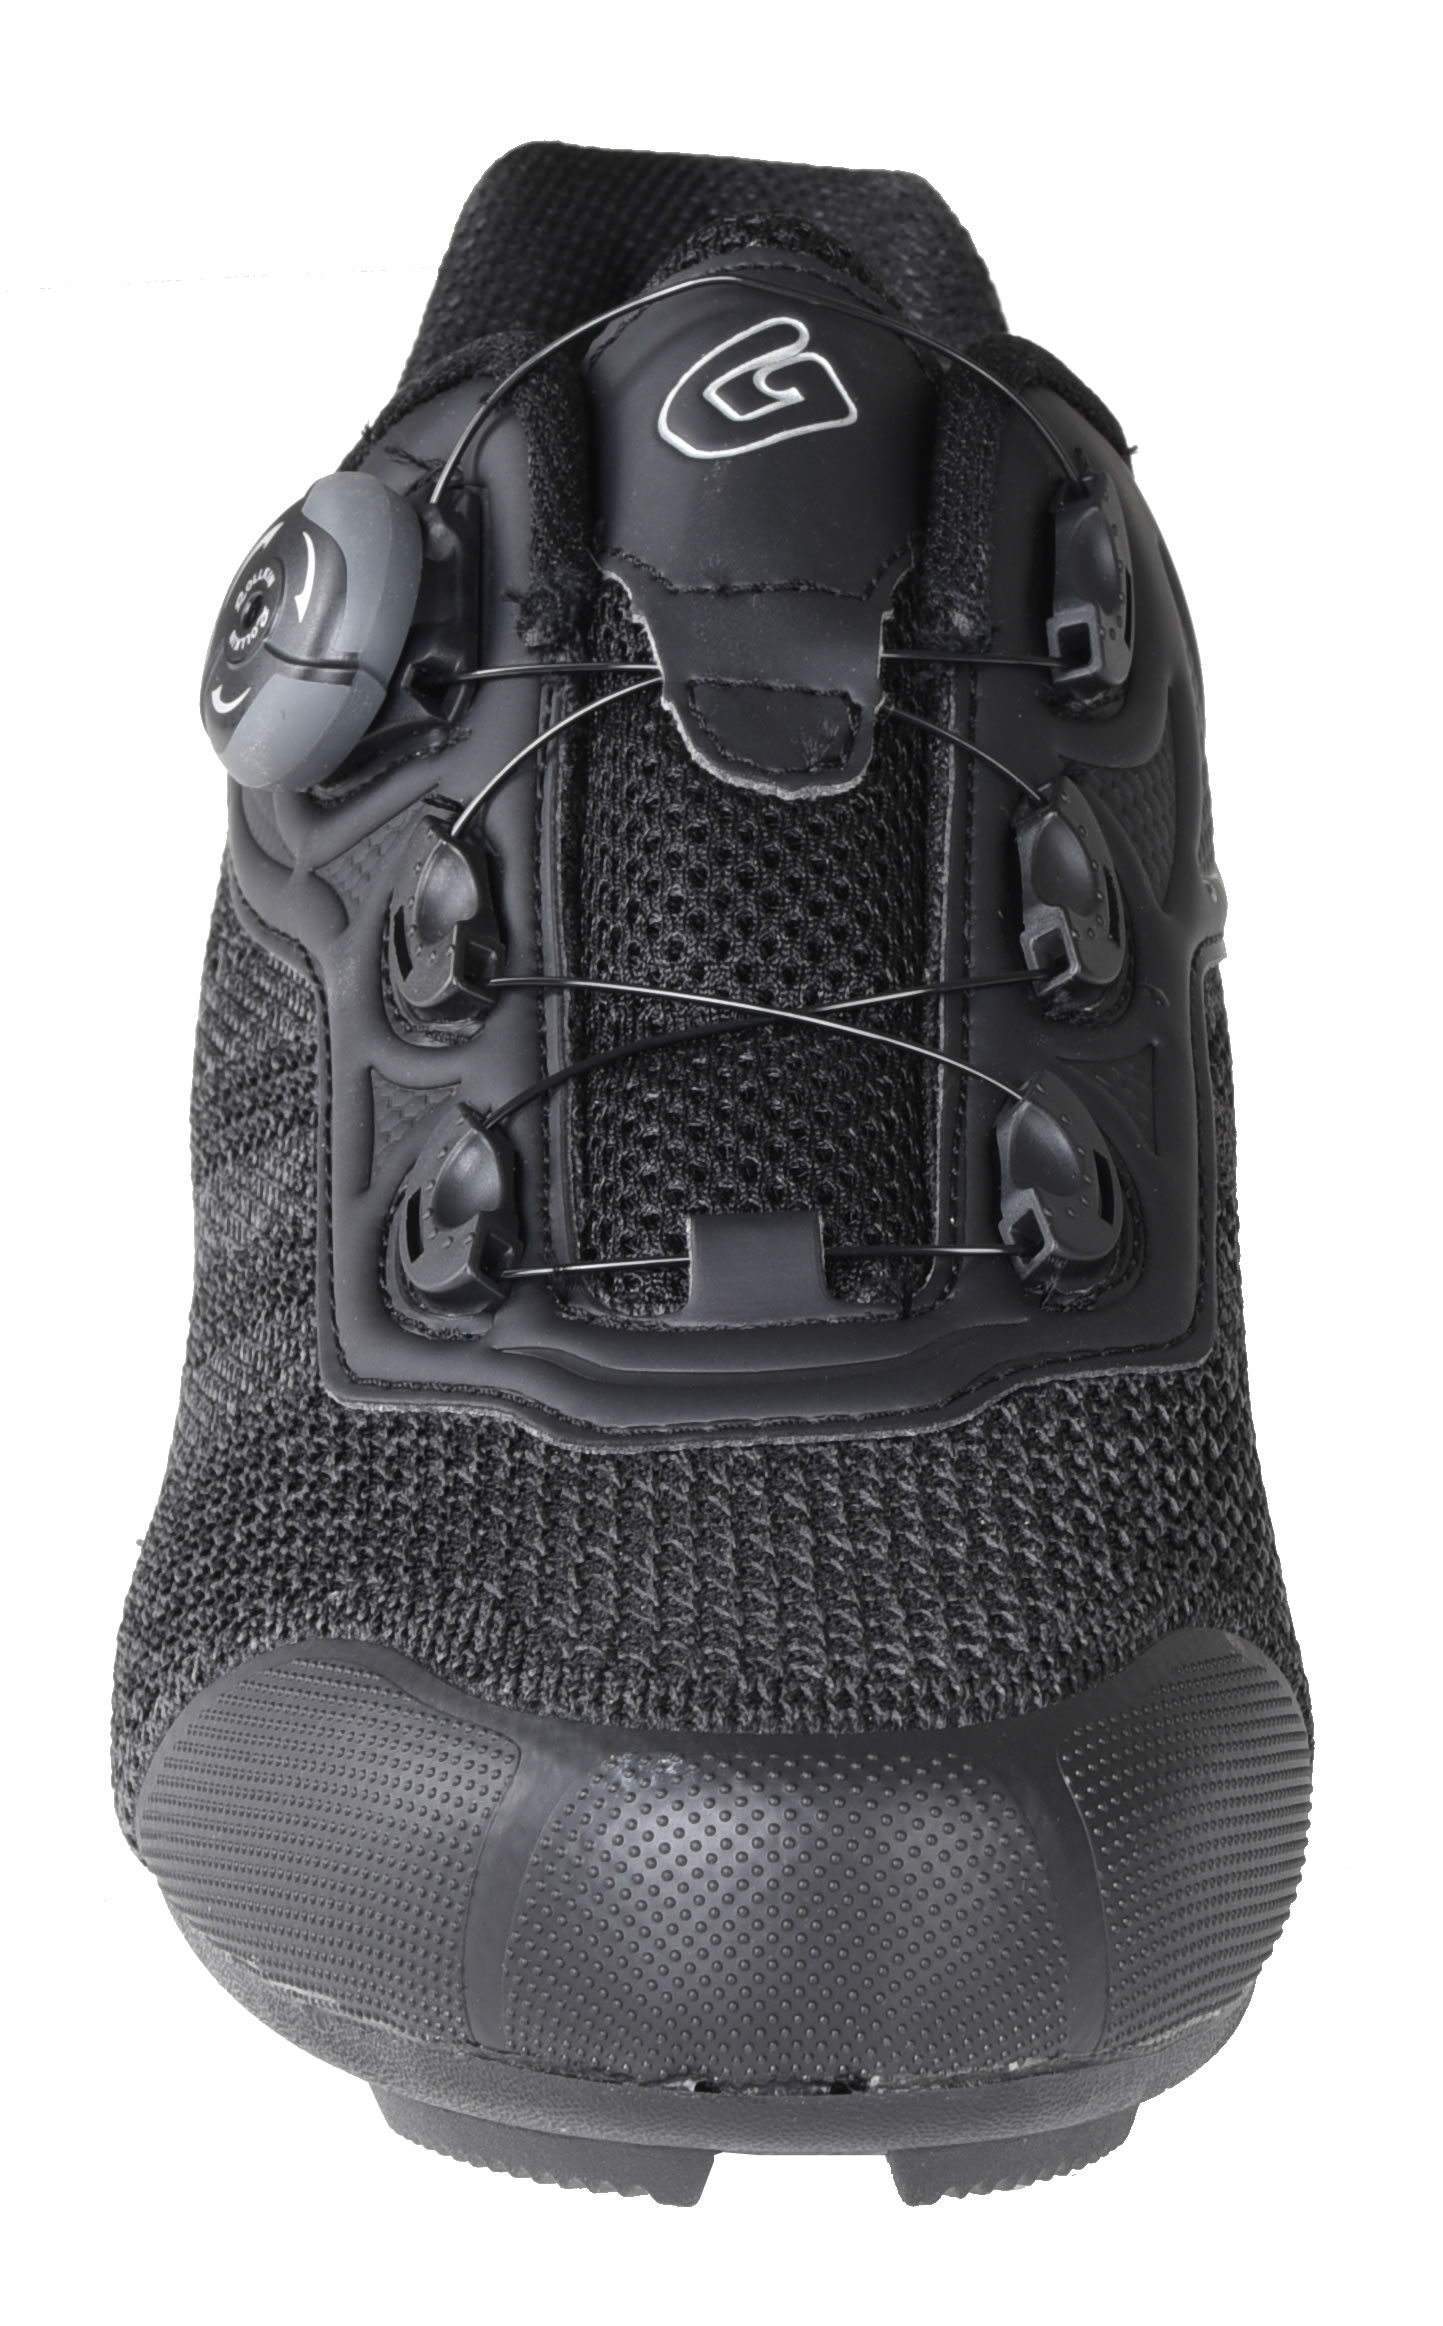 Gavin Pro Road / Indoor Cycling Shoe, Quick Lace - 3 Bolt Road Cleat Compatible - image 5 of 10